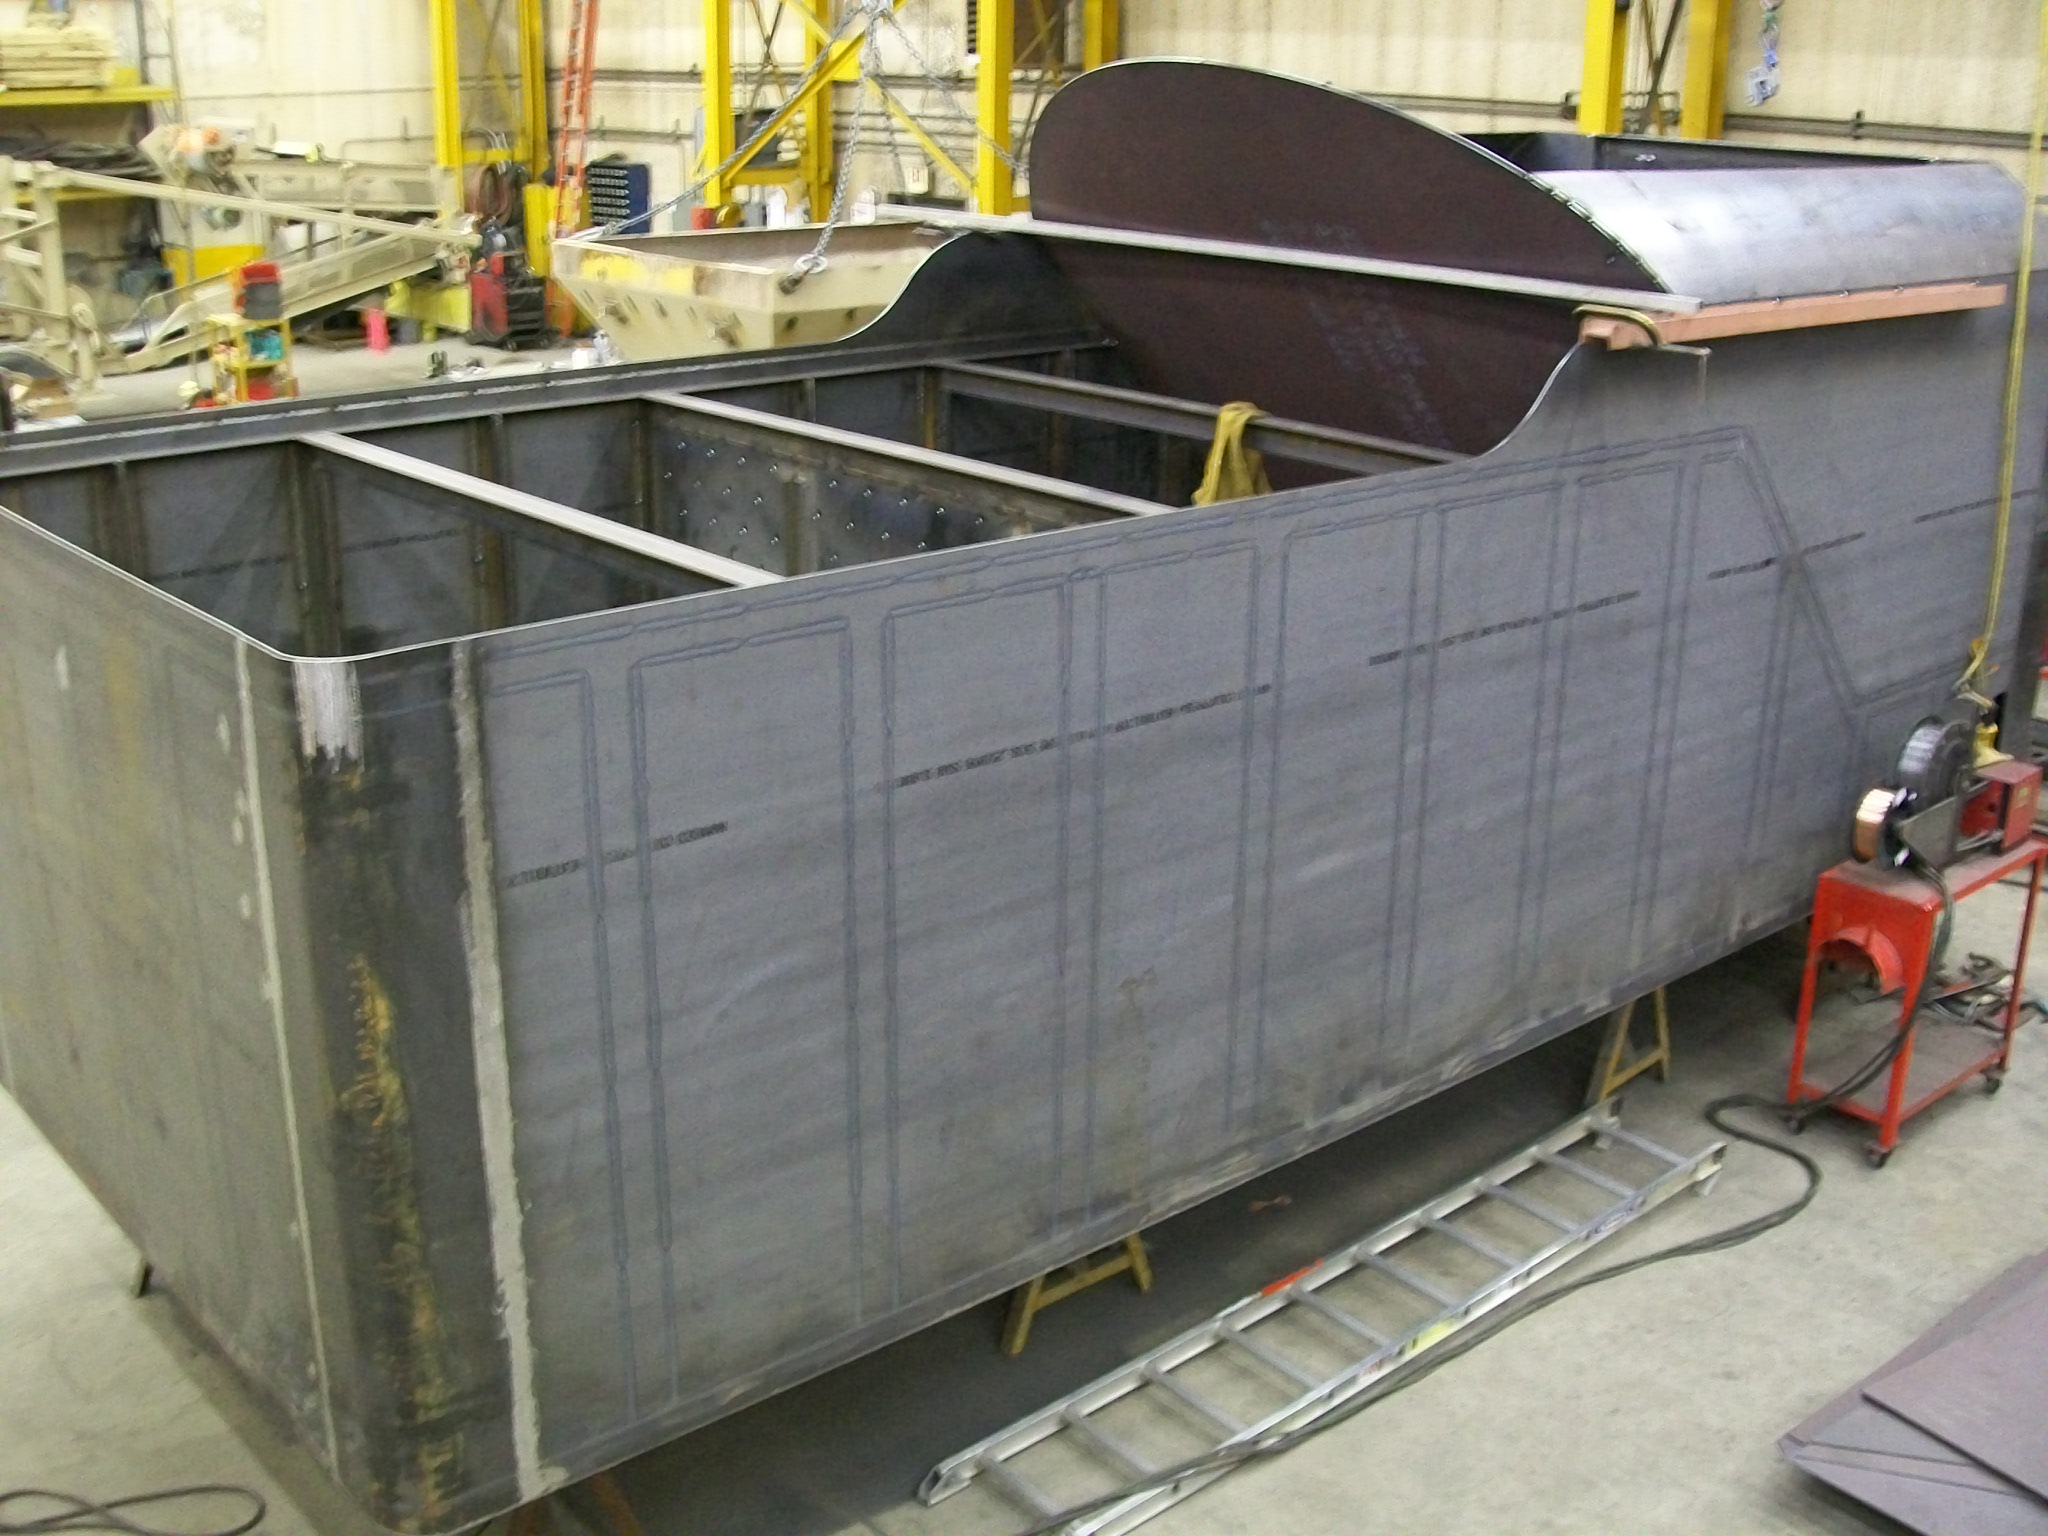 New C&NW 1385 tender tank under construction at DRM Industries. March 2, 2012. Photo by DRM Industries